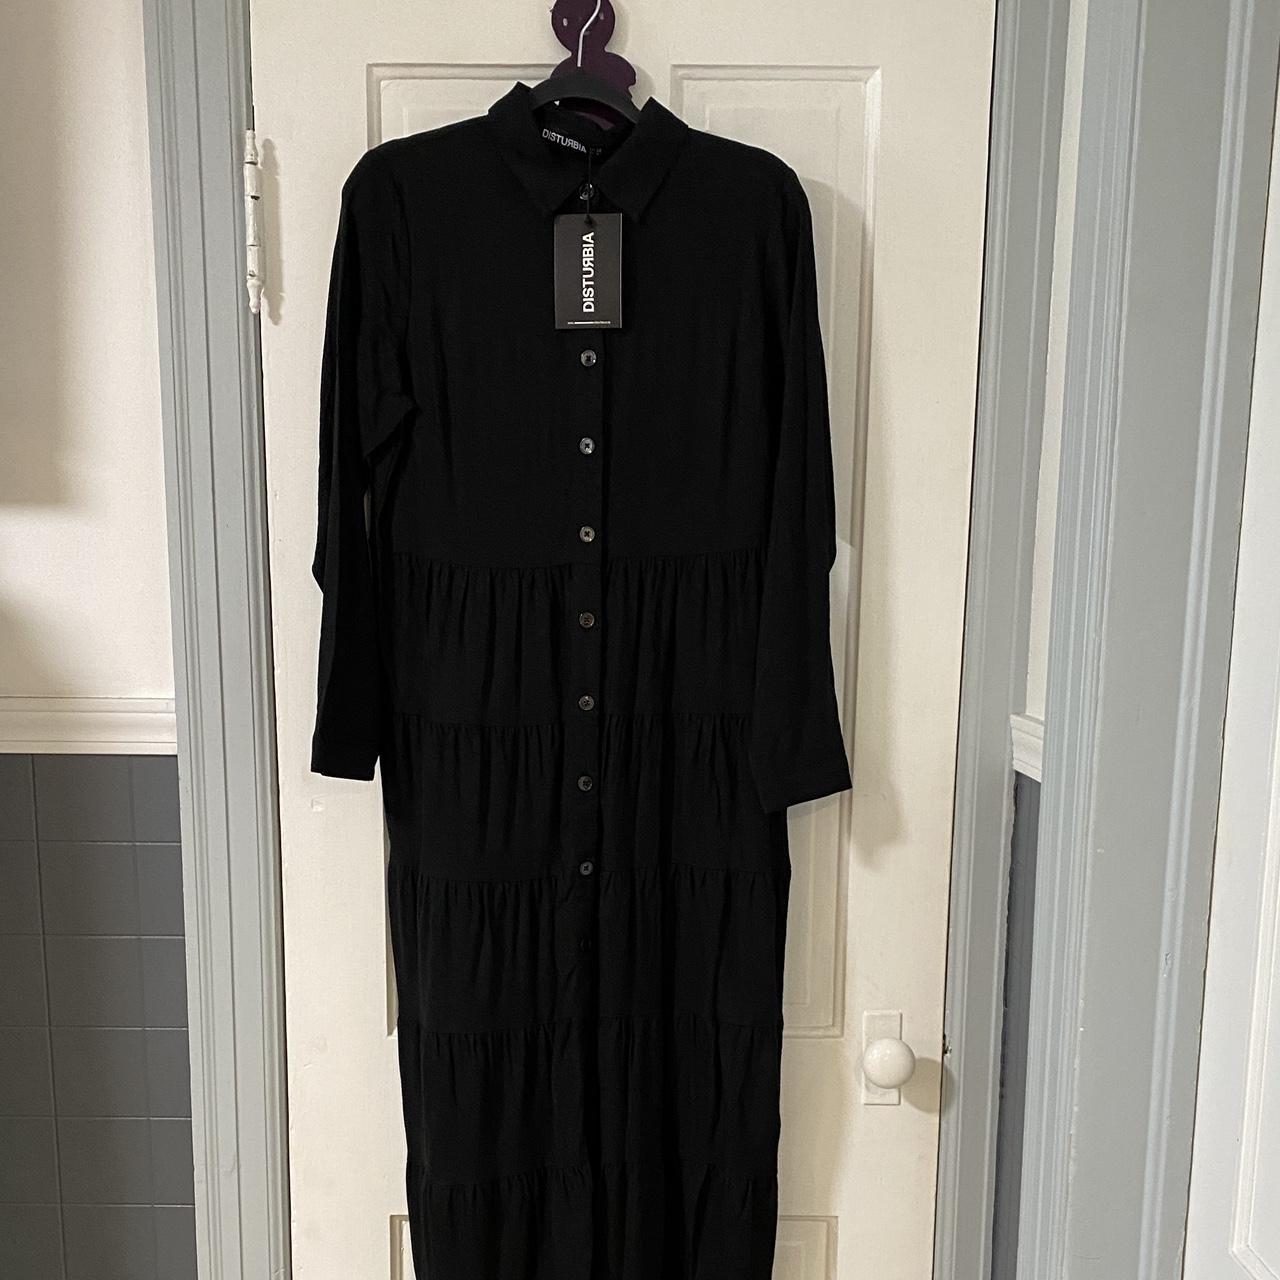 Product Image 1 - Linen Dress w Tiered Skirt
NWT